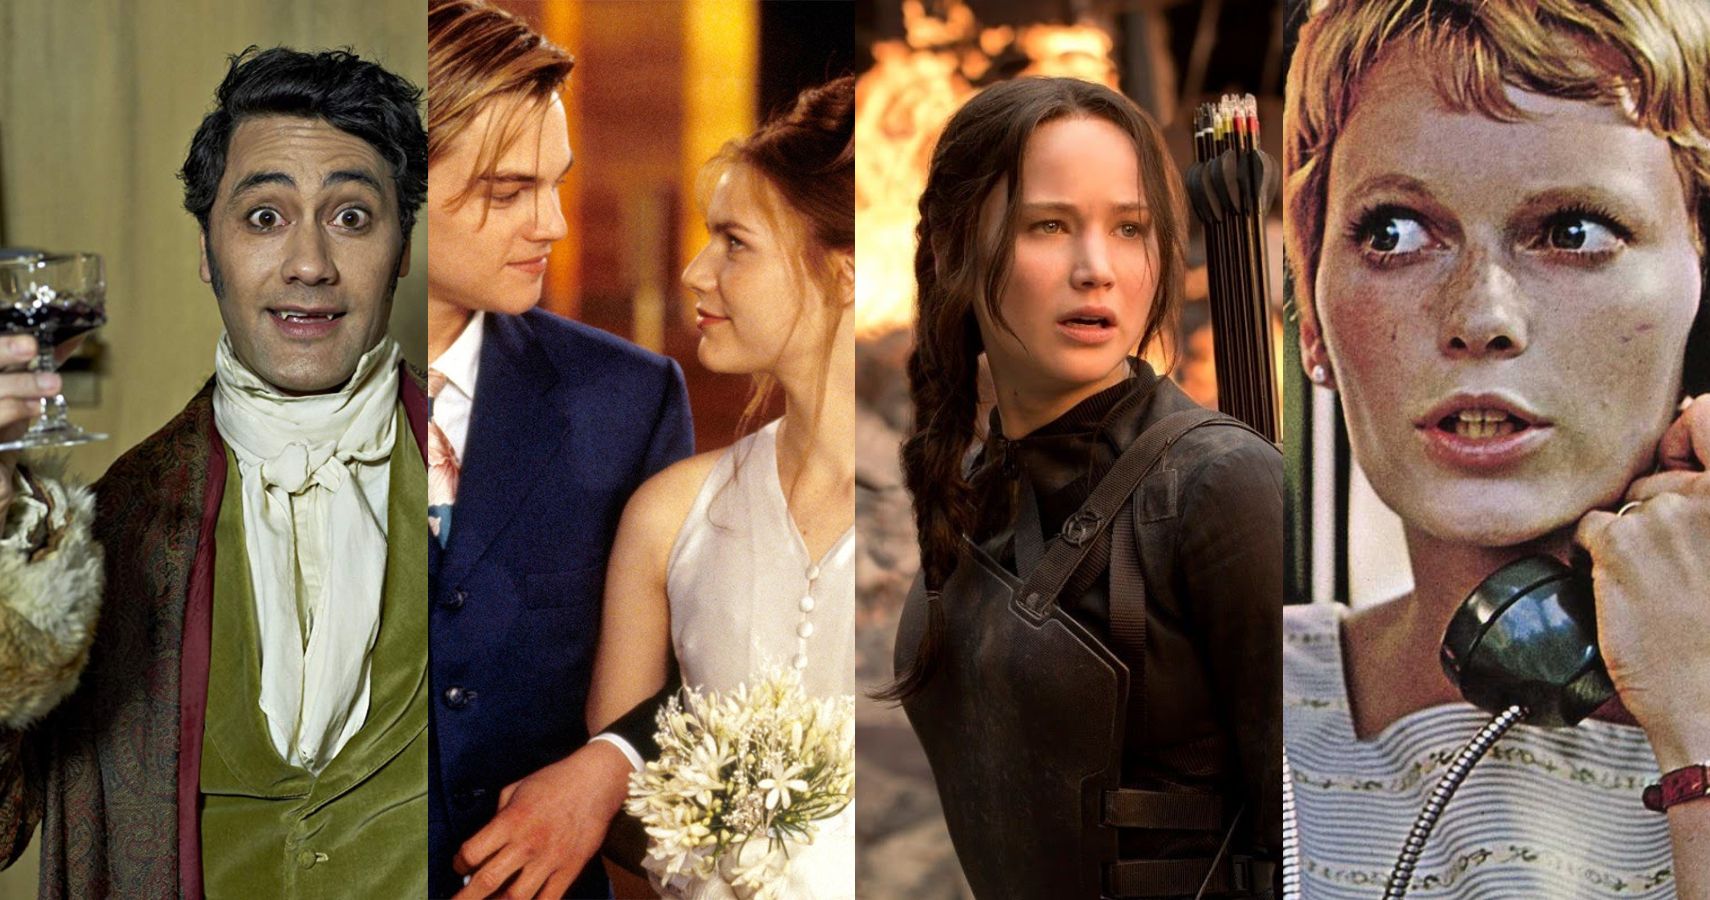 10 Things To Watch If You Love Twilight